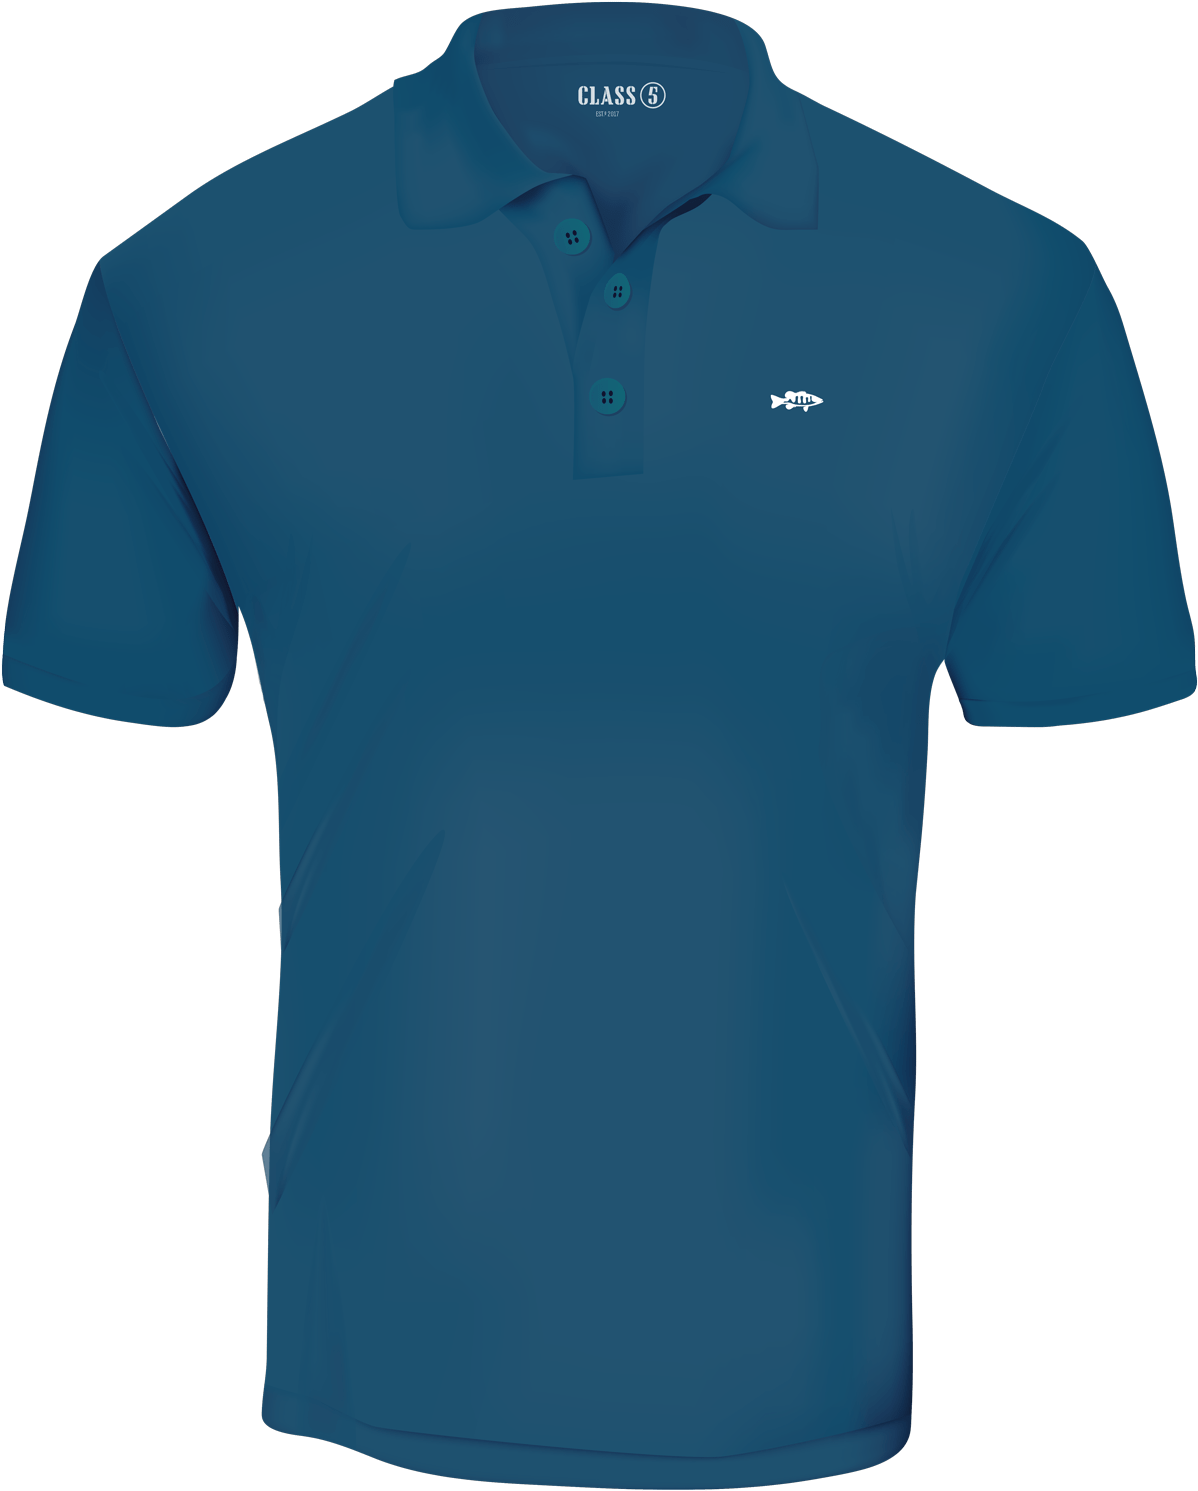 Polo Shirt Png - Polo Shirt Clipart - Large Size Png Image - PikPng